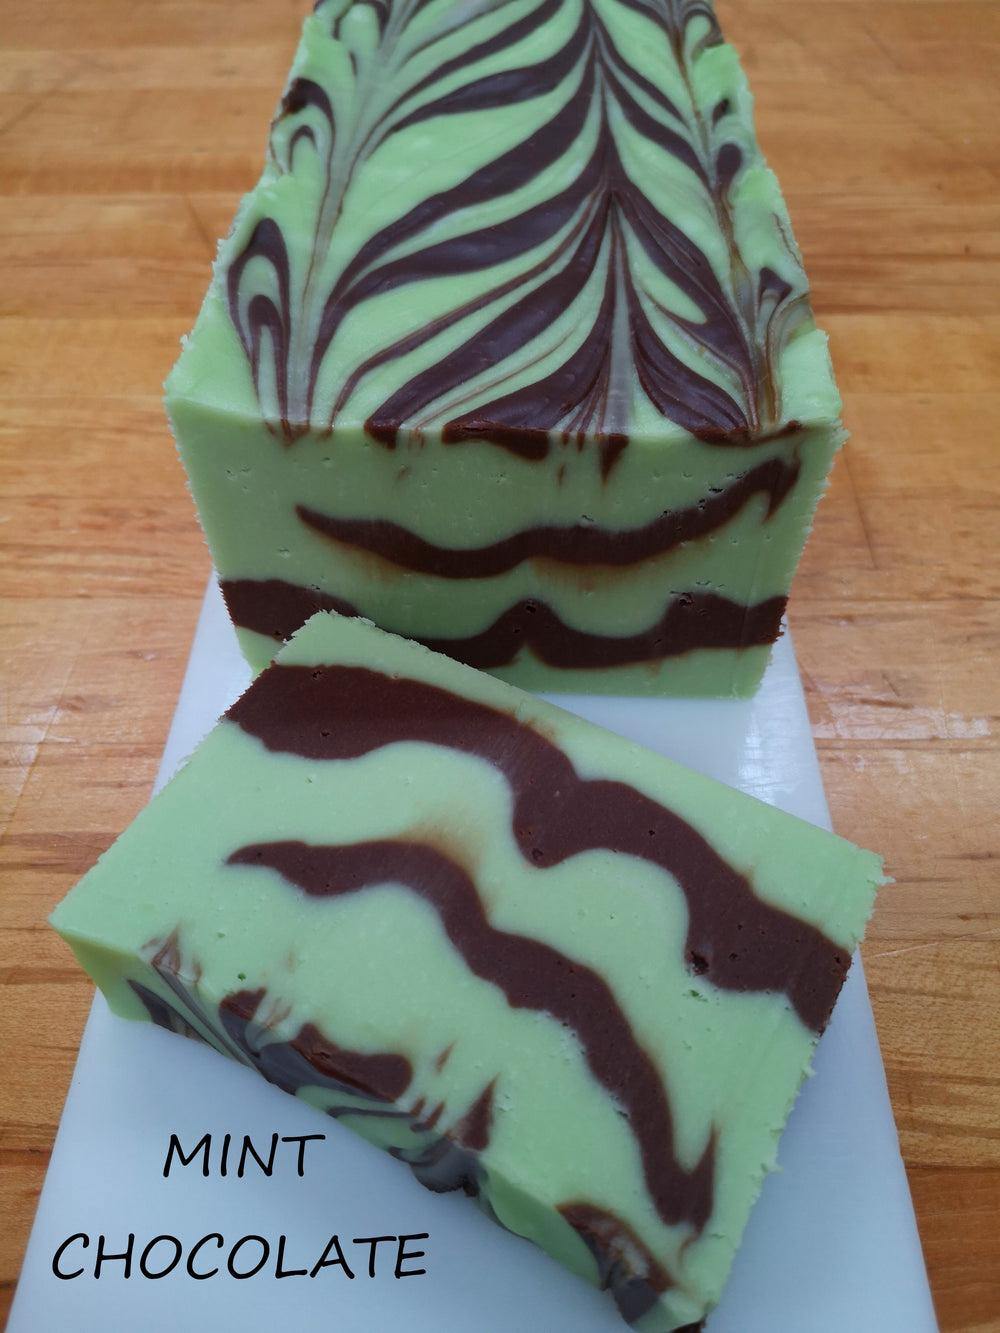 10 Mint Chocolate - 1/2 lb. Deli Containers - $38.50